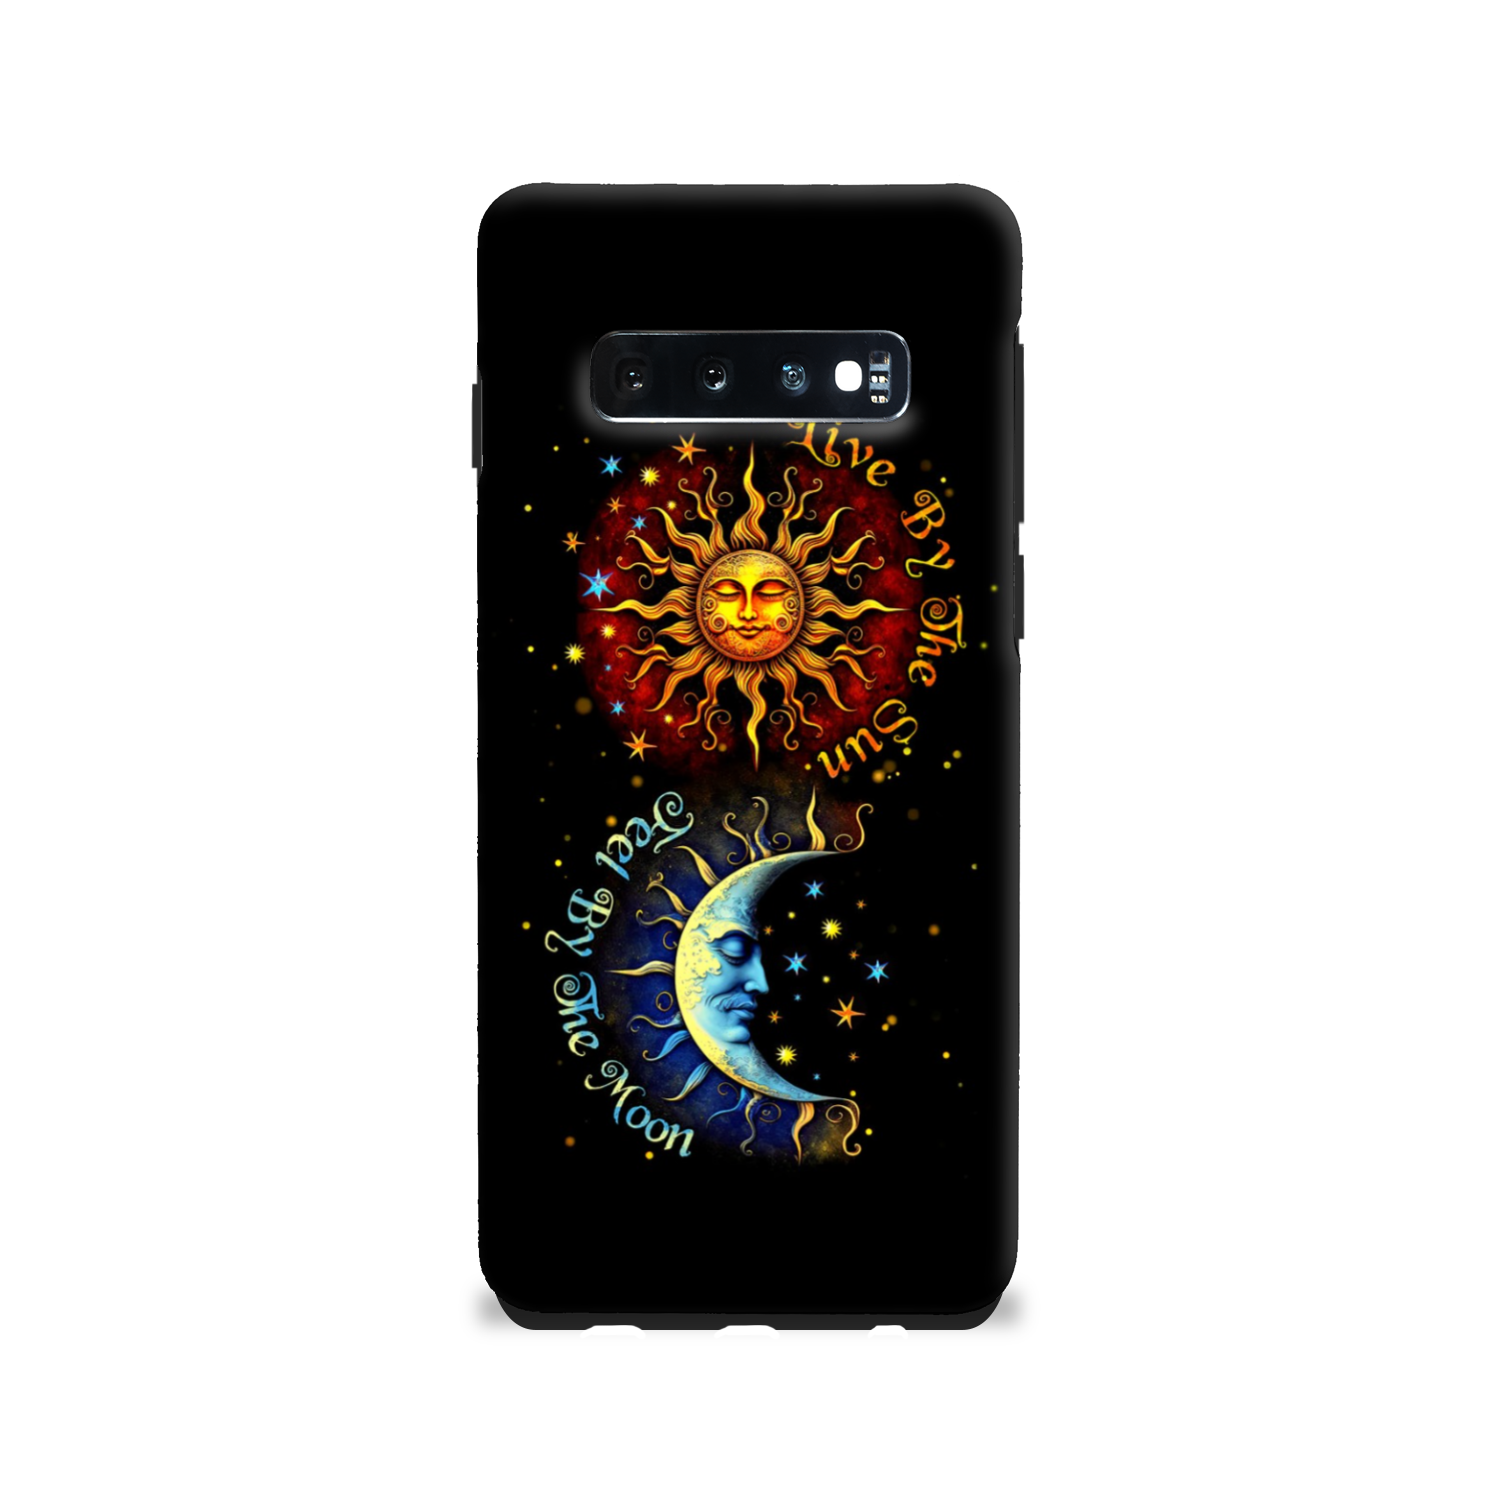 LIVE BY THE SUN PHONE CASE - TYTM2303234